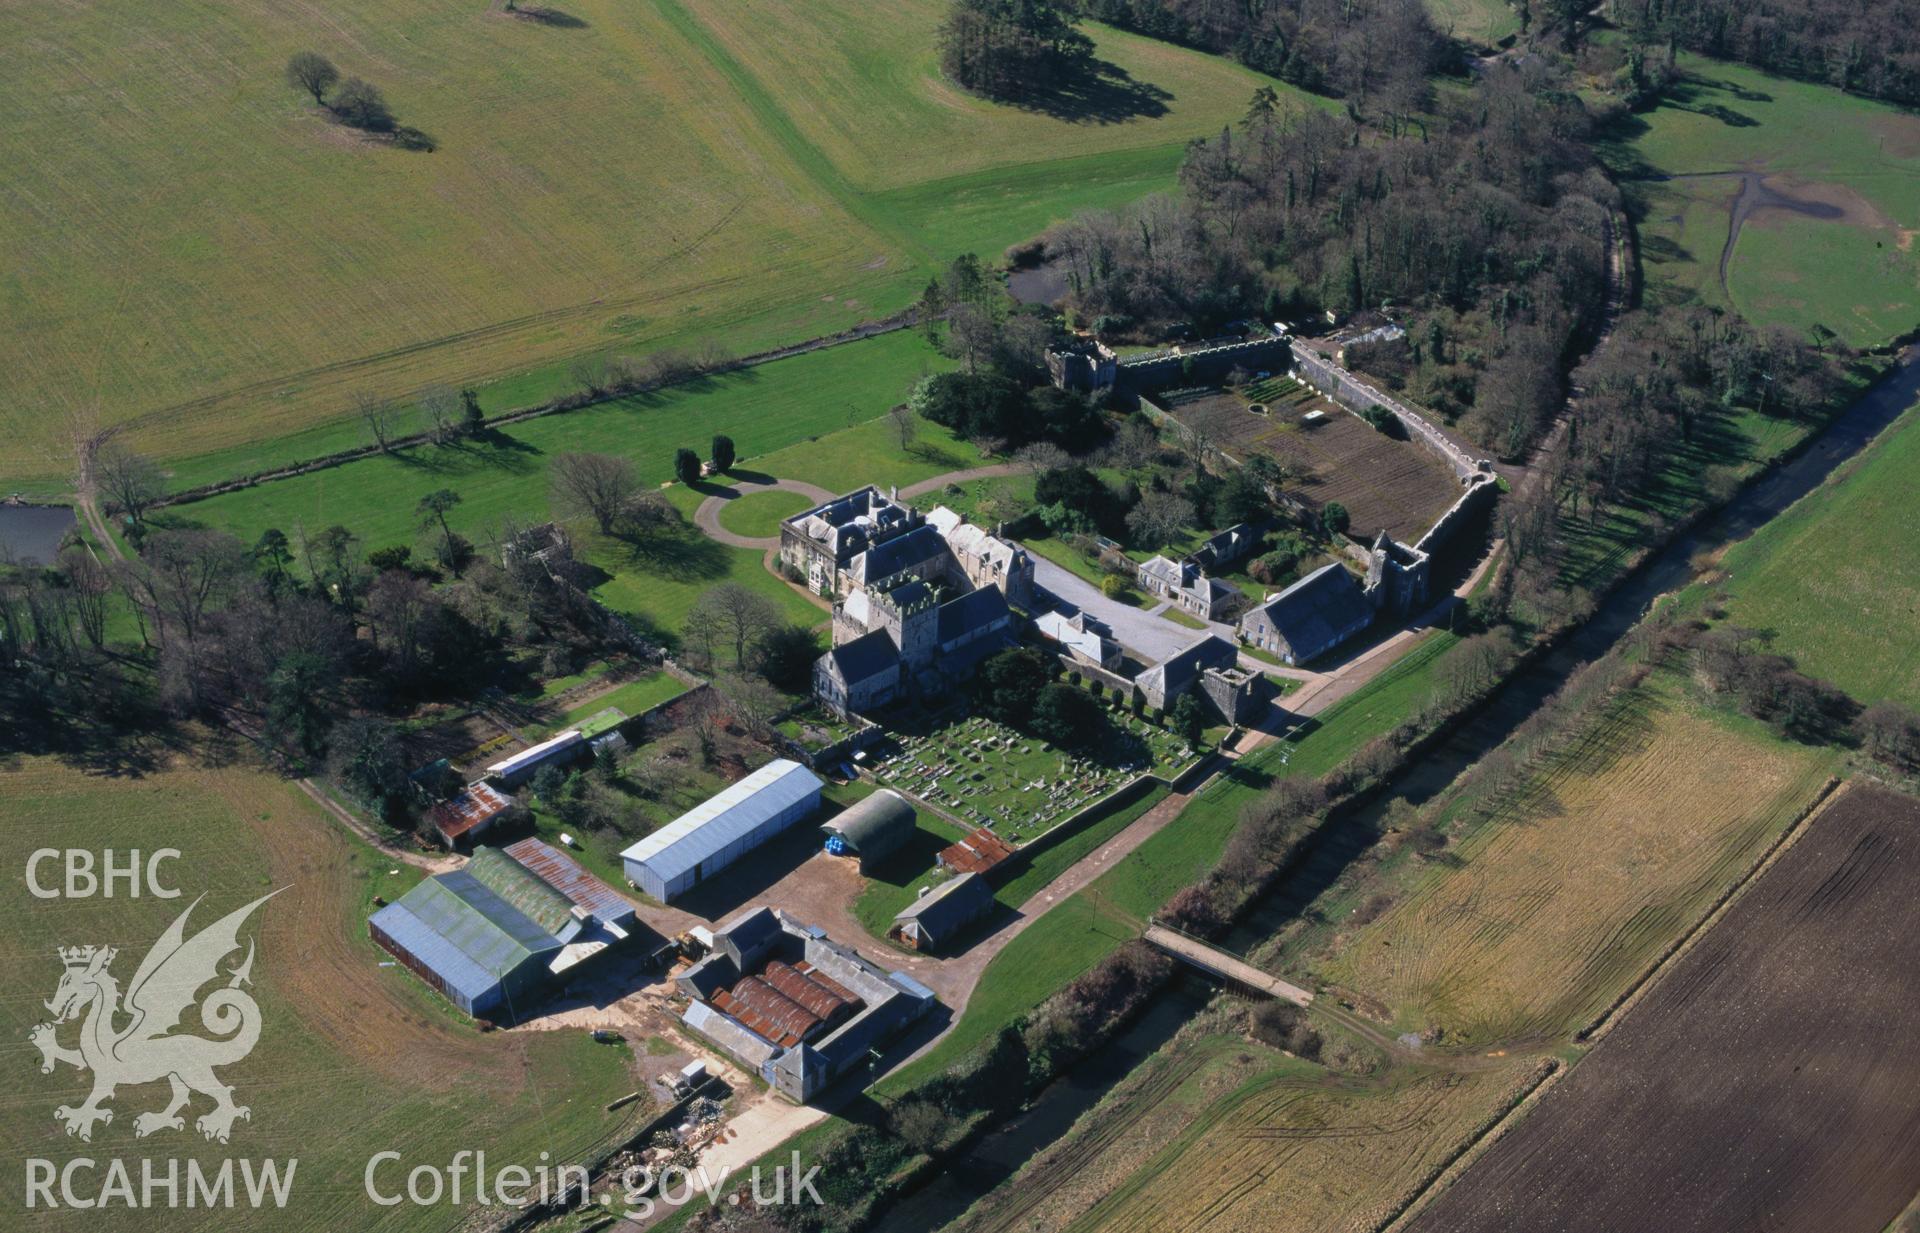 RCAHMW colour oblique aerial photograph of Ewenny Priory taken on 29/03/1995 by C.R. Musson